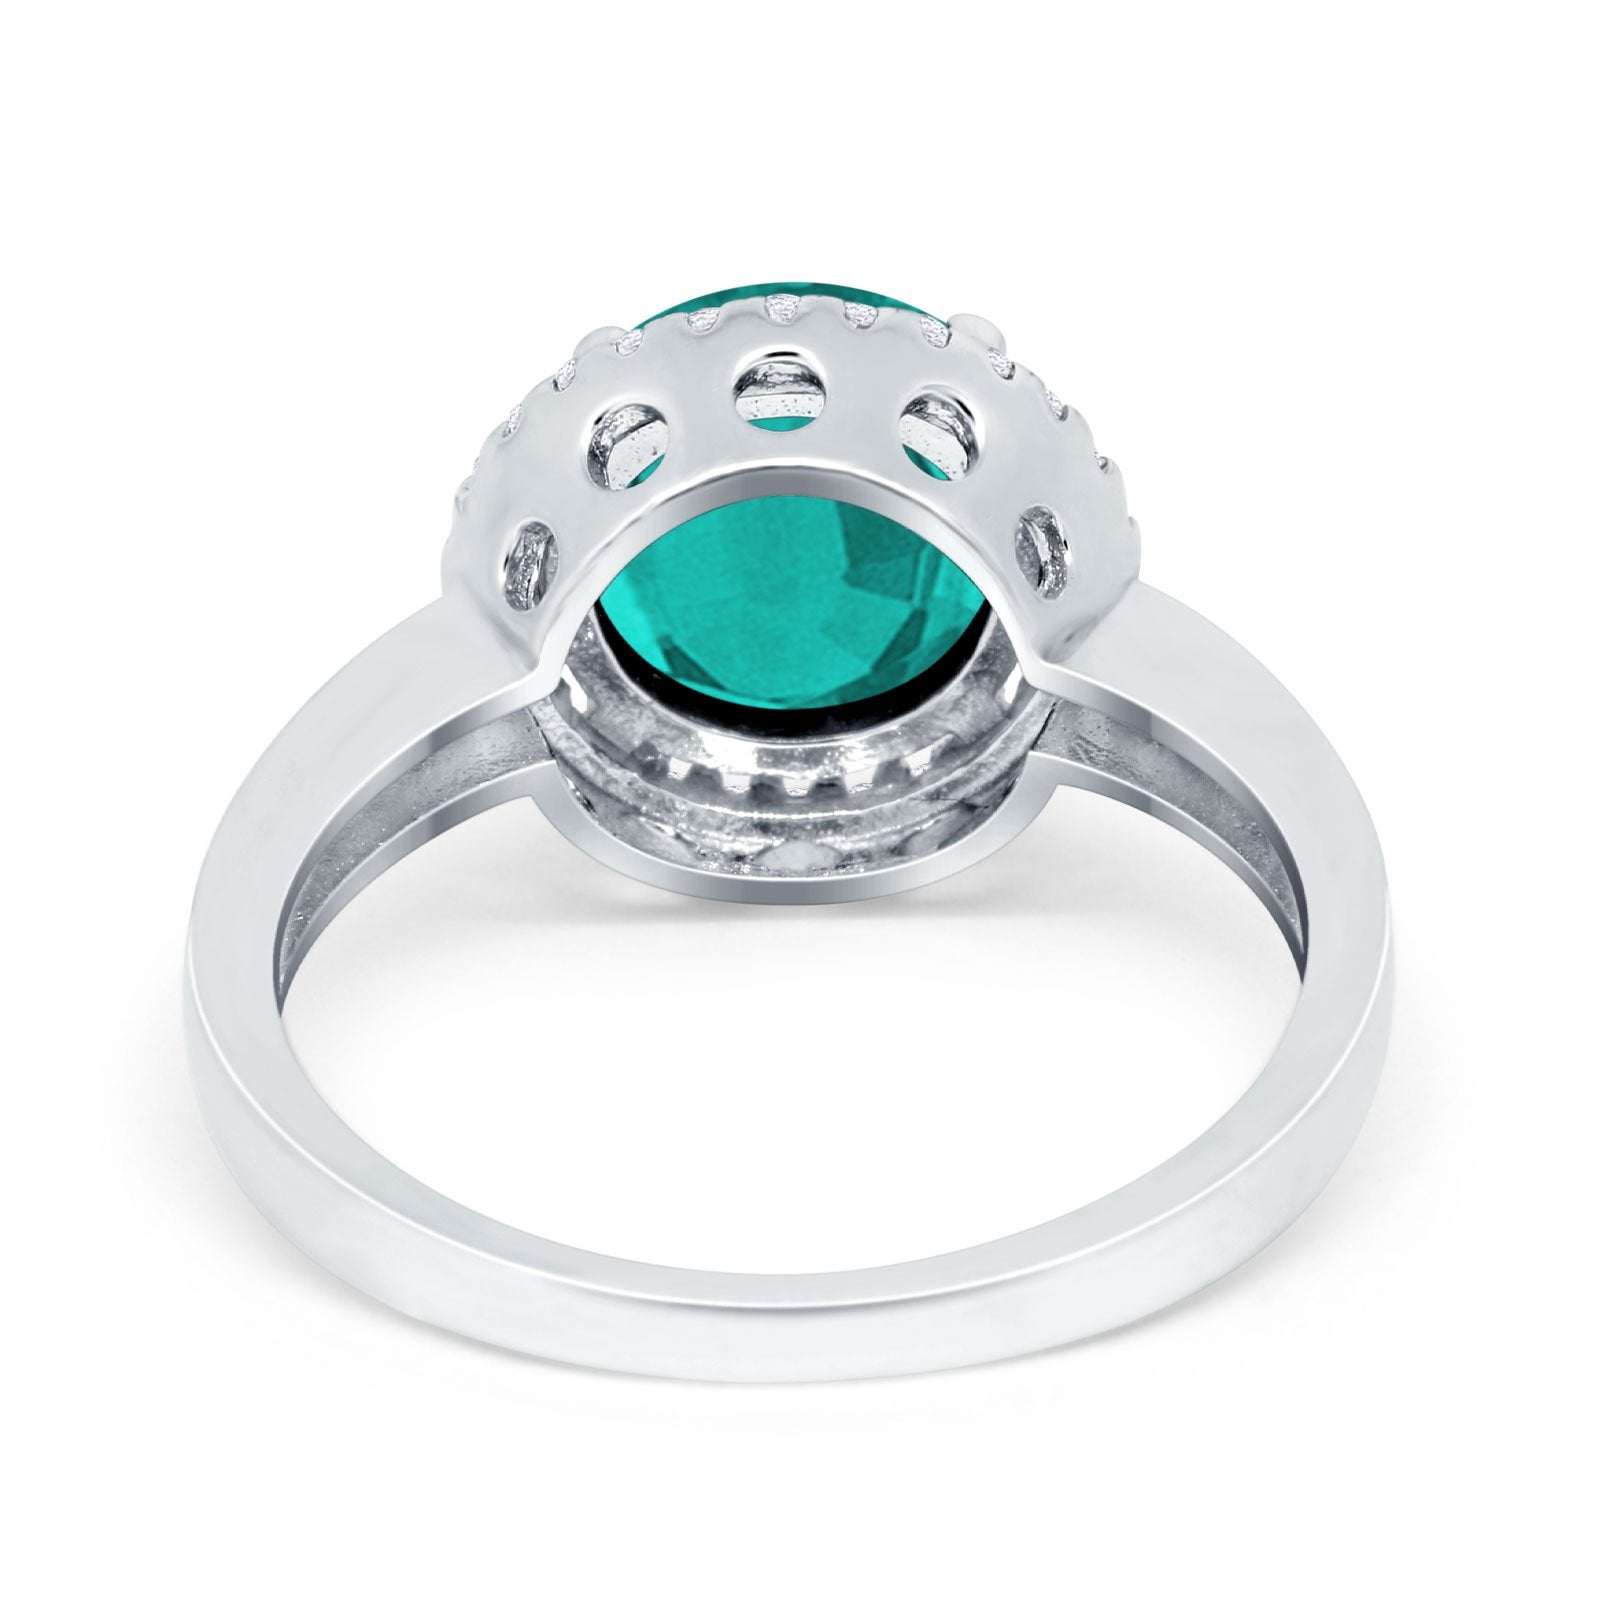 Halo Engagement Ring Large Round Simulated Paraiba Tourmaline CZ 925 Sterling Silver